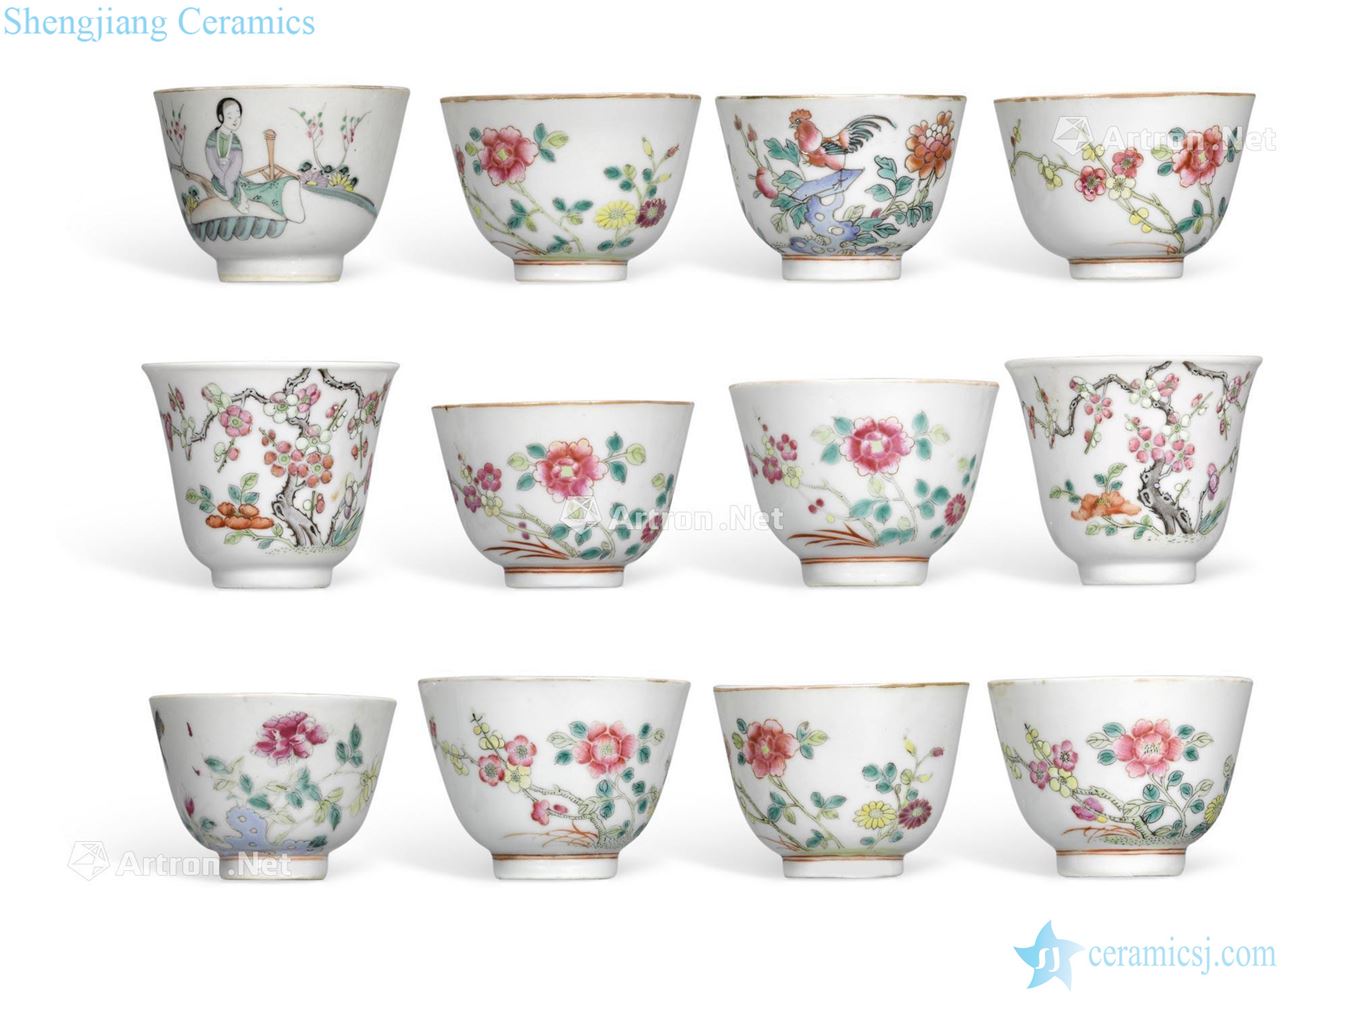 The newest the Qing/Republic period A LARGE ASSEMBLED GROUP OF FAMILLE ROSE ENAMELED CUPS